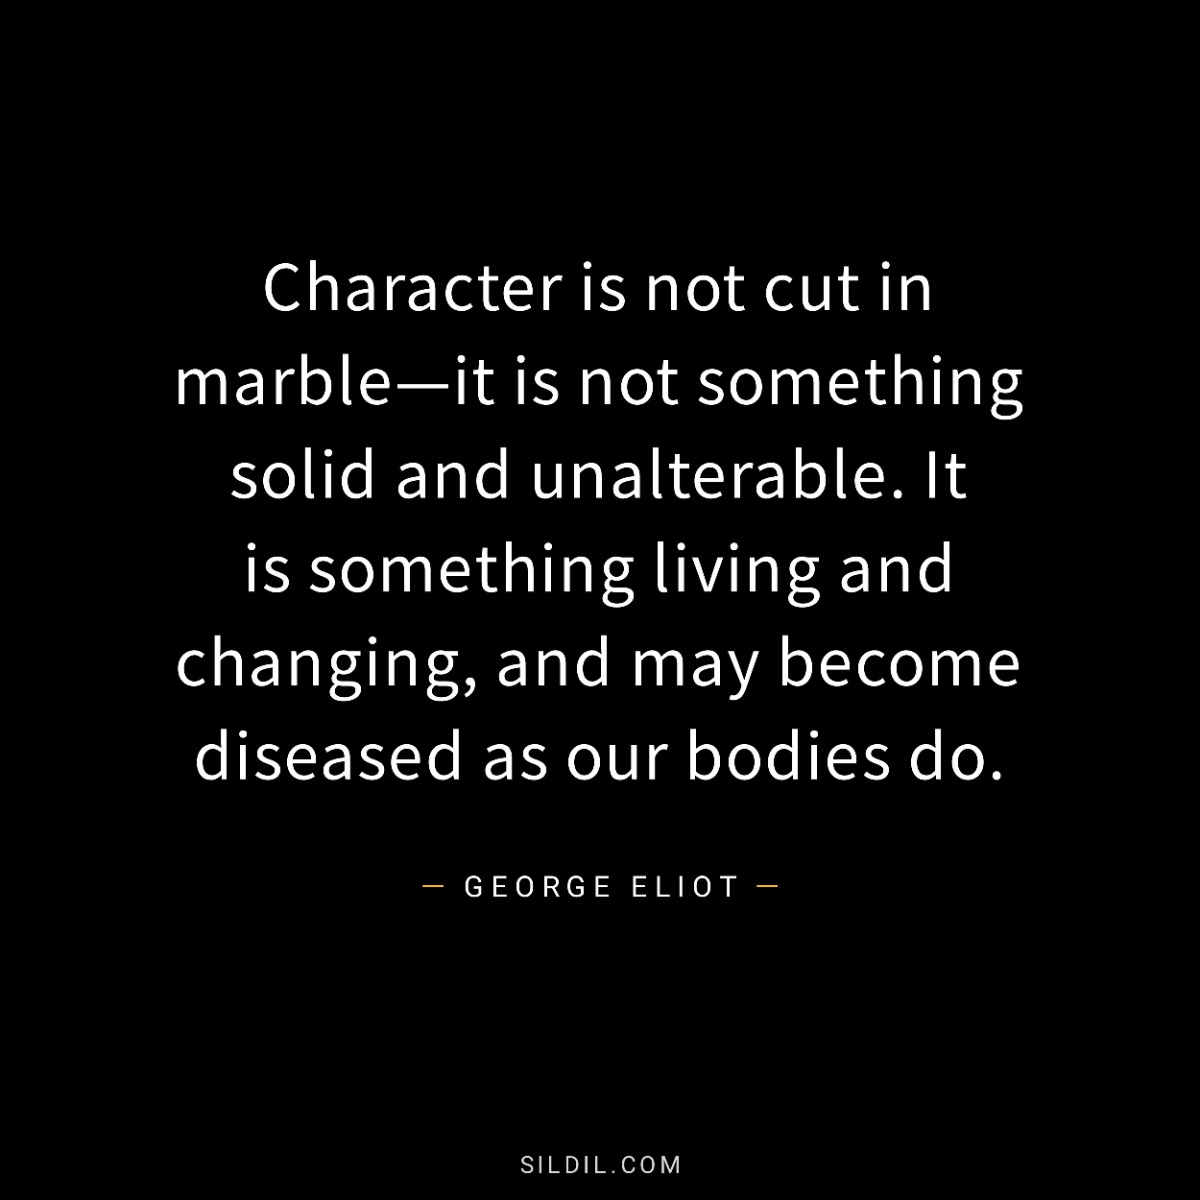 Character is not cut in marble—it is not something solid and unalterable. It is something living and changing, and may become diseased as our bodies do.